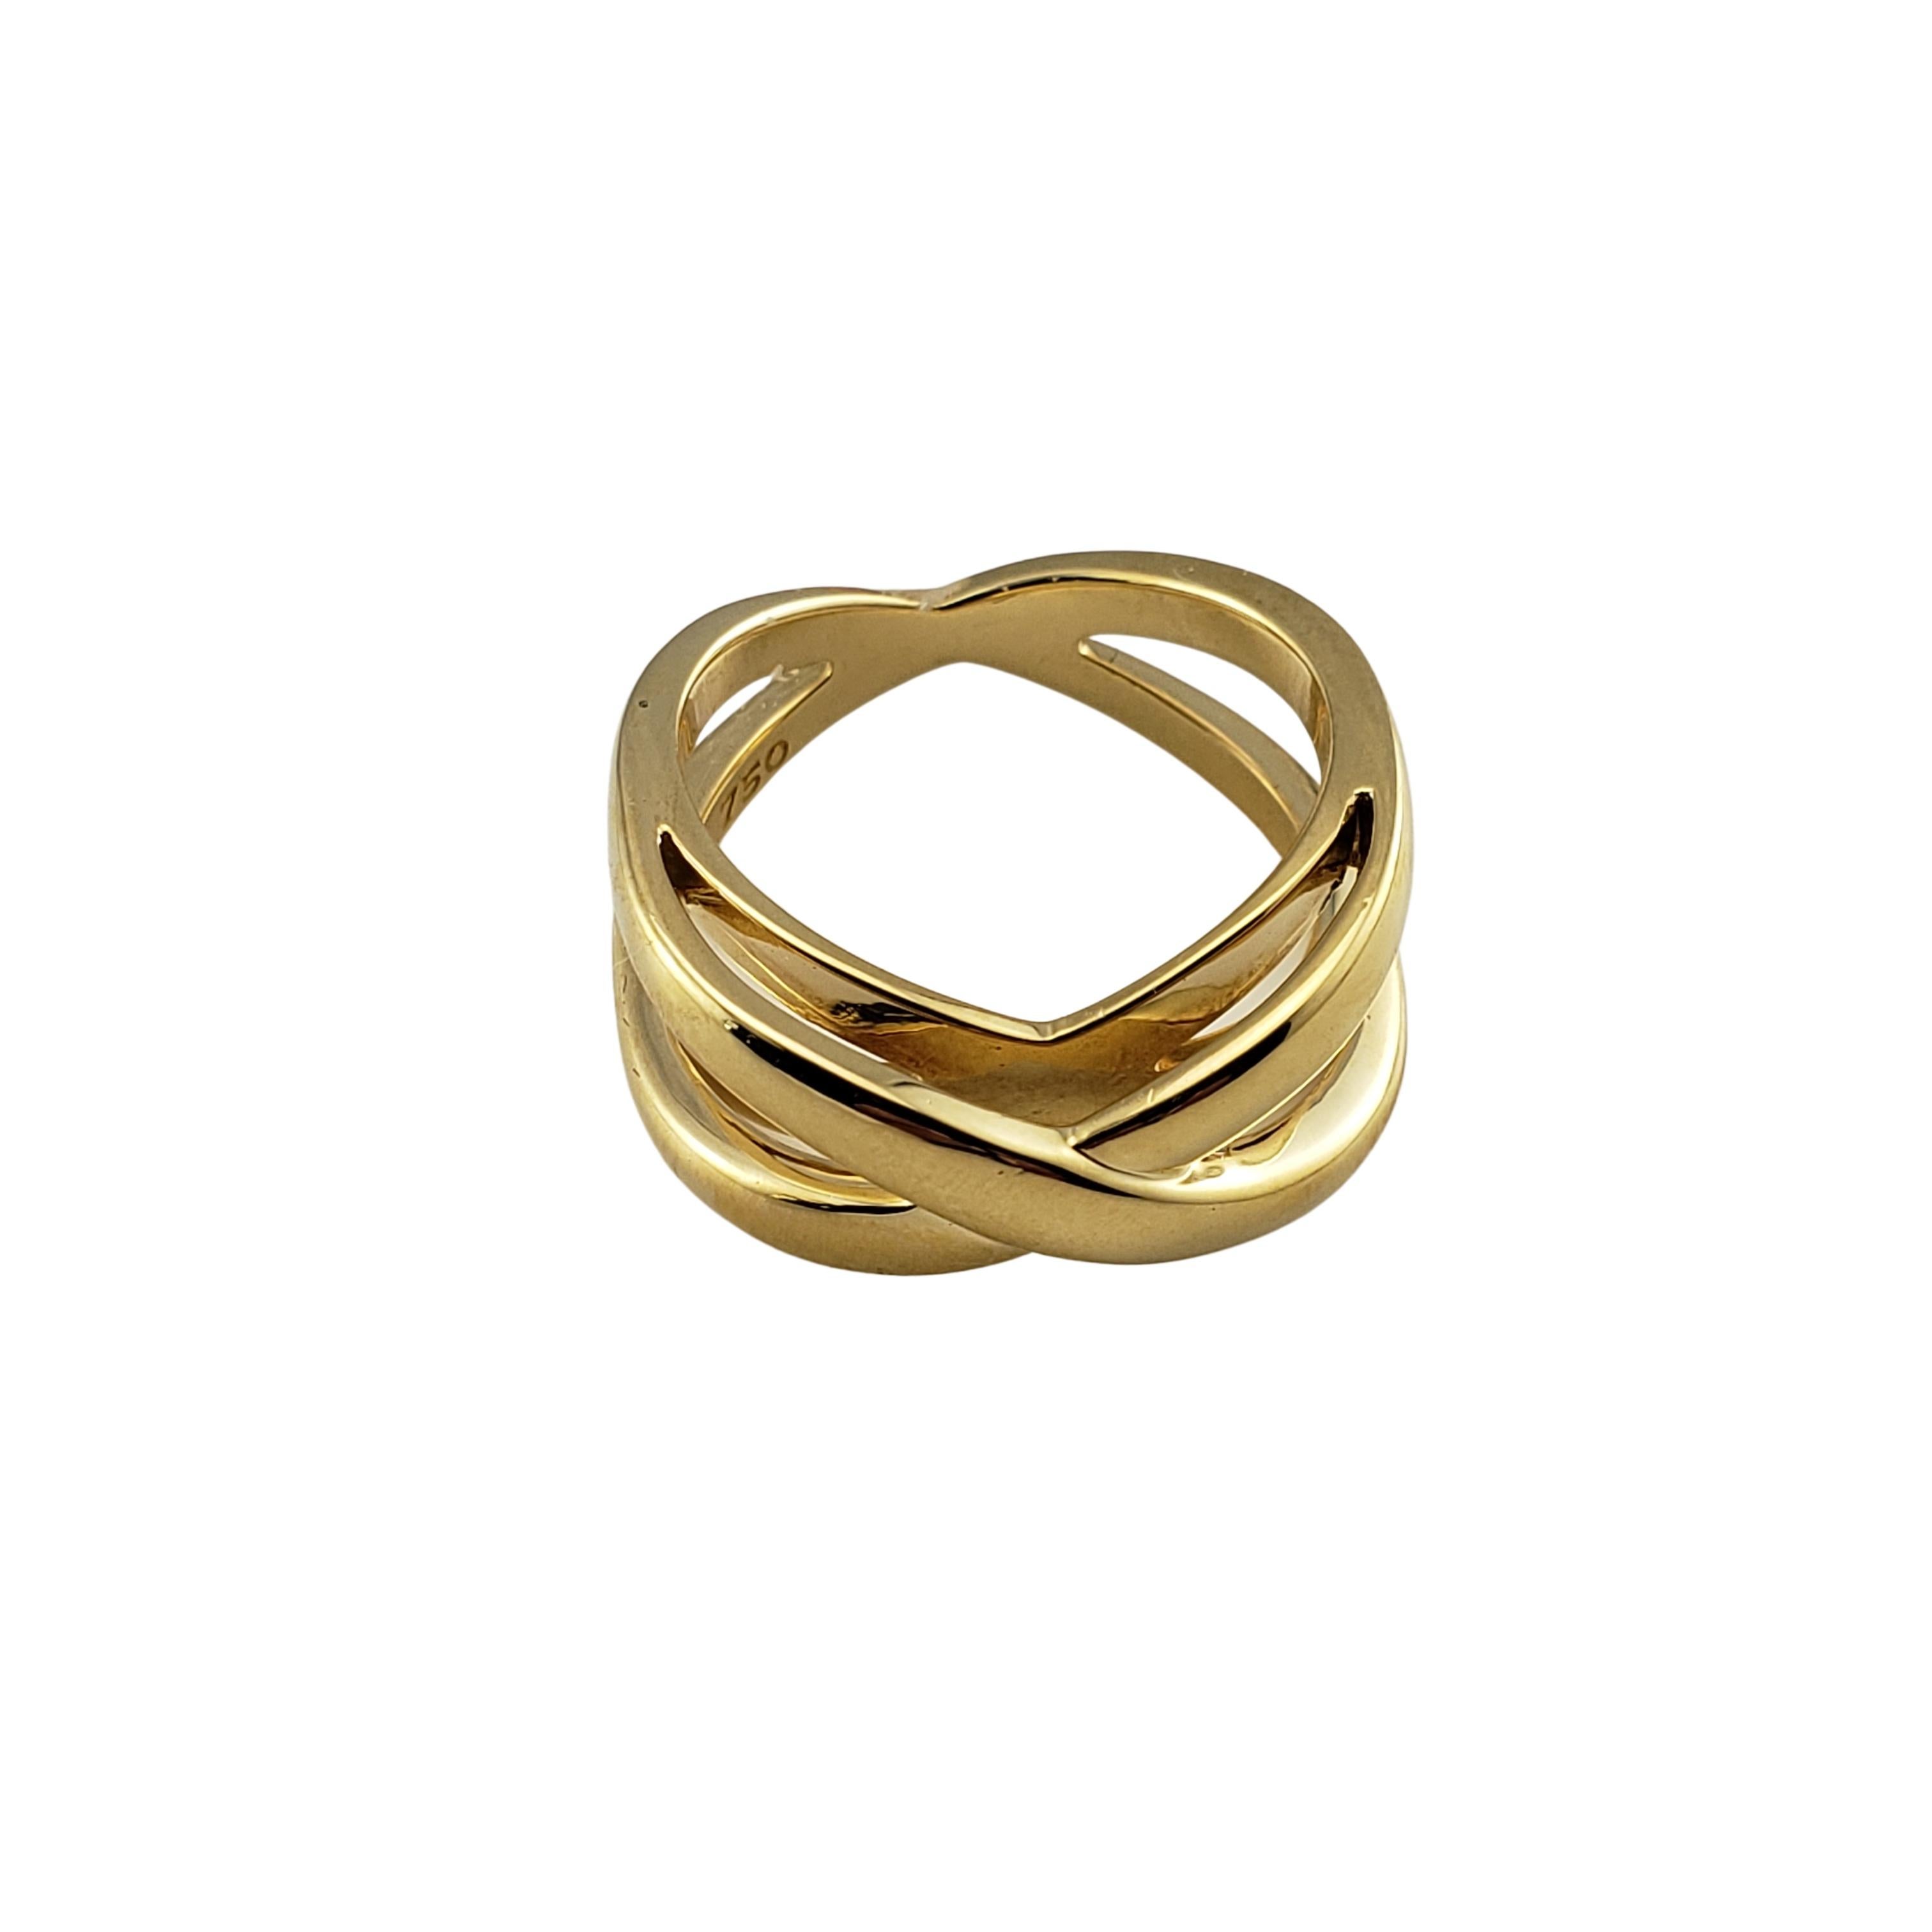 Vintage Tiffany and Co. 18 Karat Yellow Gold Crisscross Ring Size 6.75-

This elegant ring is crafted in beautifully detailed 18K yellow gold by Tiffany & Co. Width: 8 mm. Shank: 3 mm. Height: 6 mm.

Ring Size: 6.75

Weight: 6.1 dwt. / 9.5